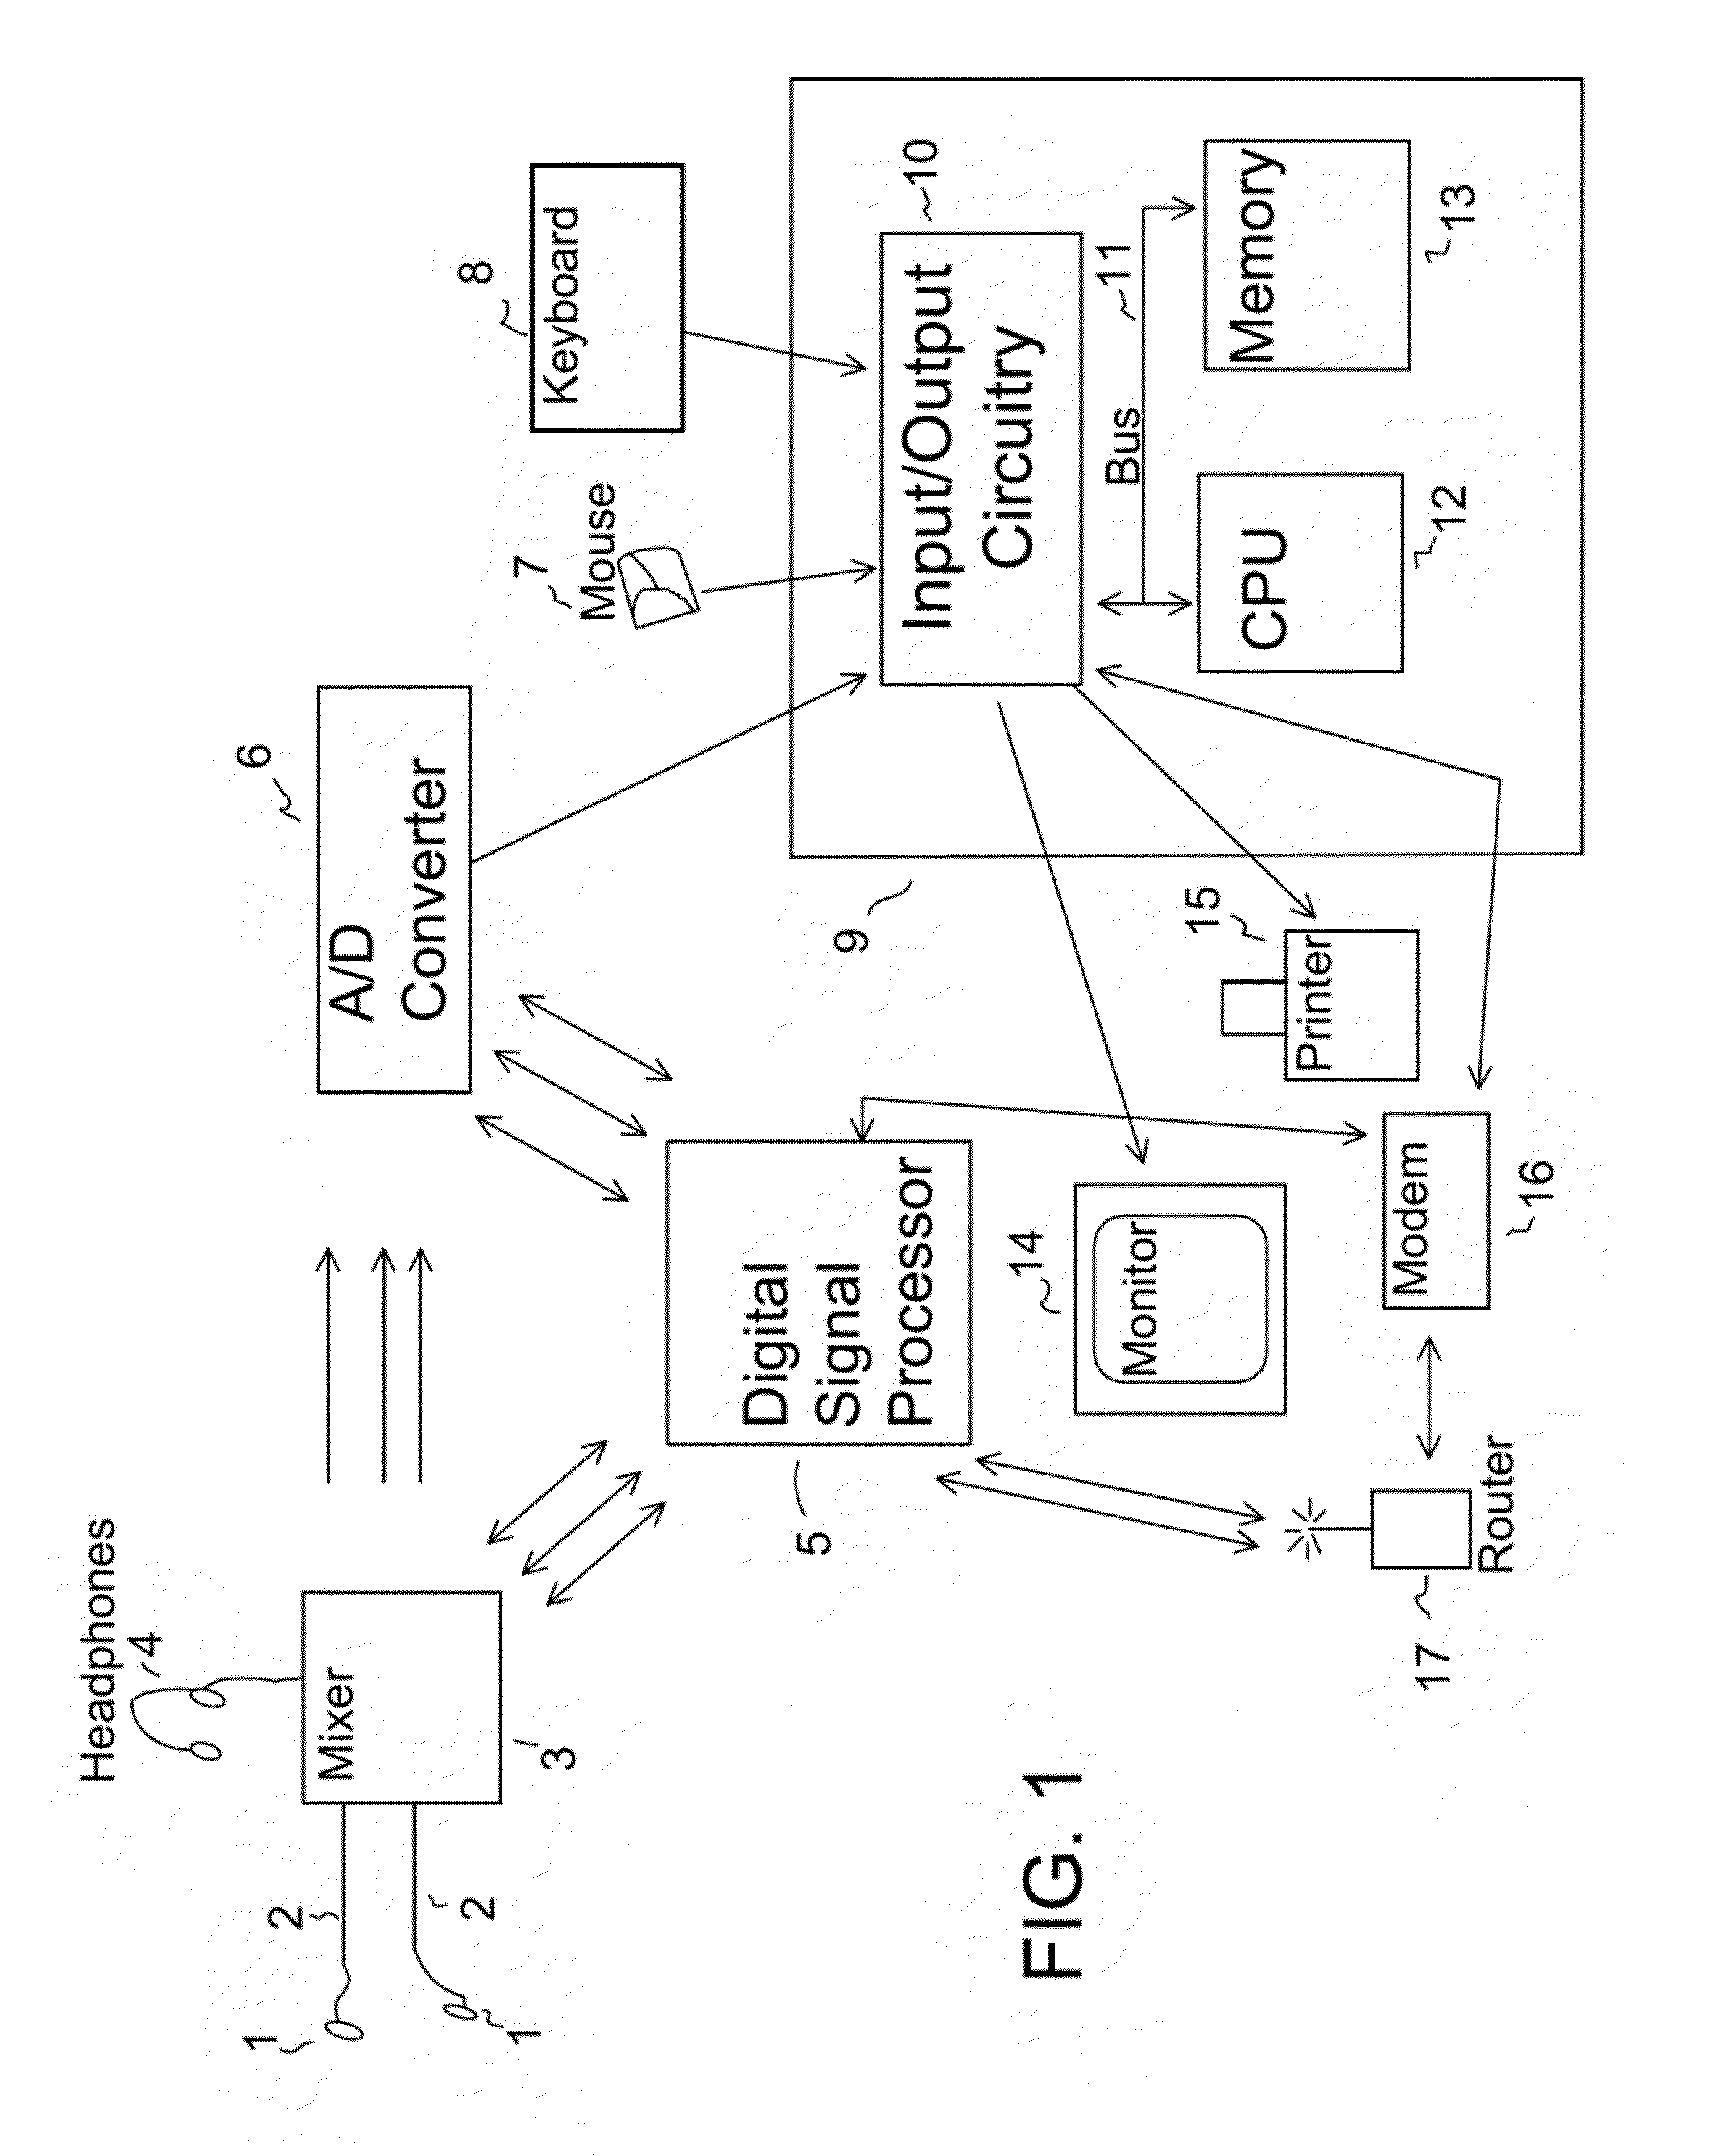 Apparatus for acquiring and processing of physiological auditory signals